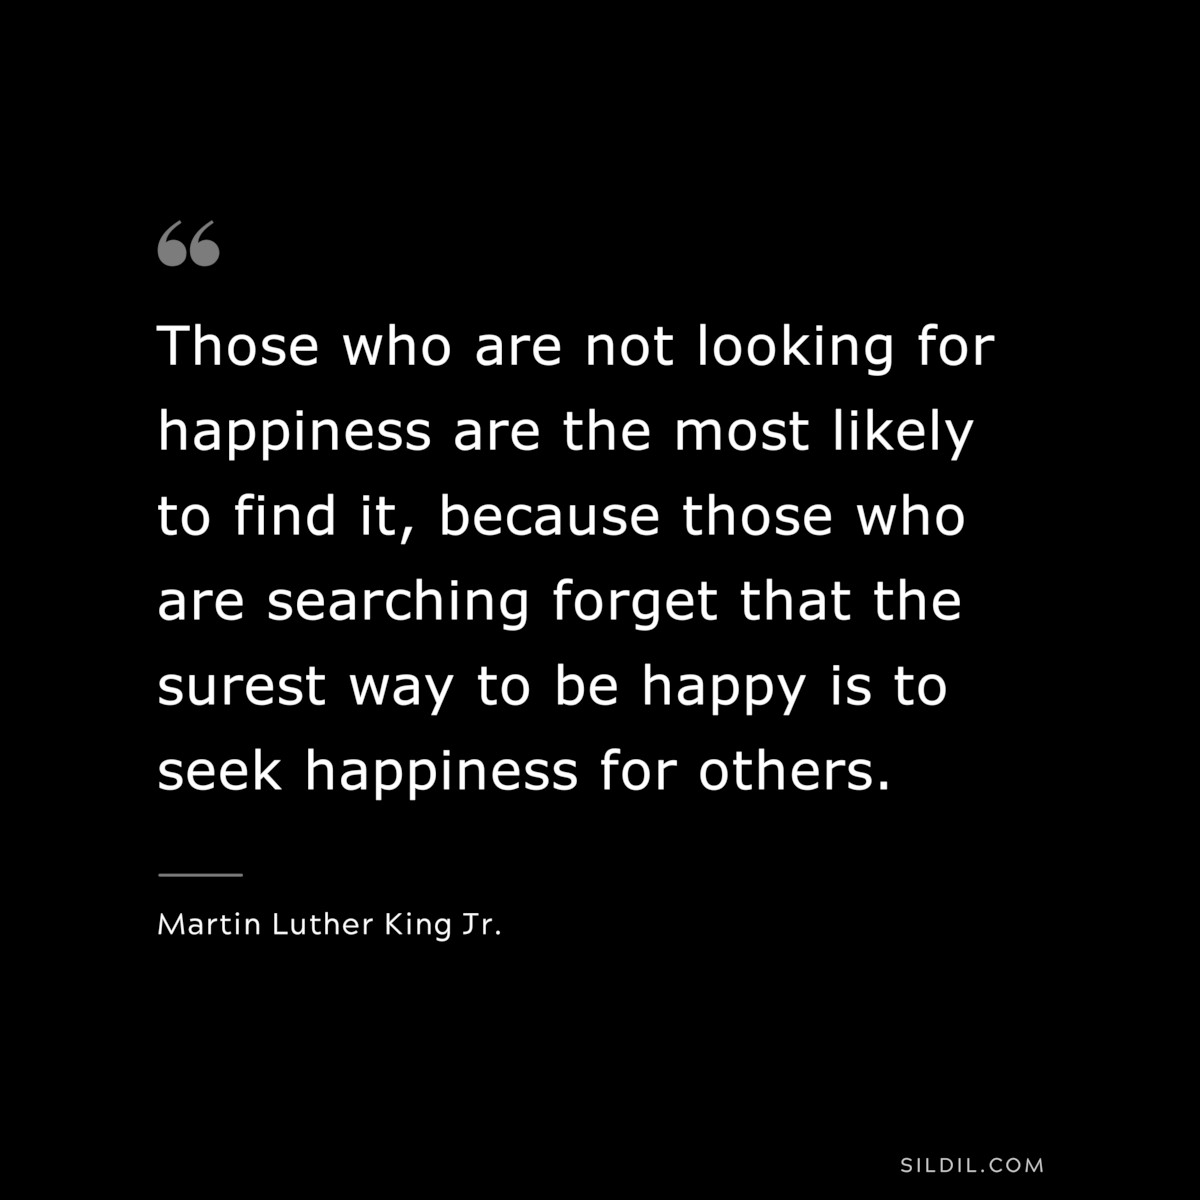 Those who are not looking for happiness are the most likely to find it, because those who are searching forget that the surest way to be happy is to seek happiness for others. ― Martin Luther King Jr.